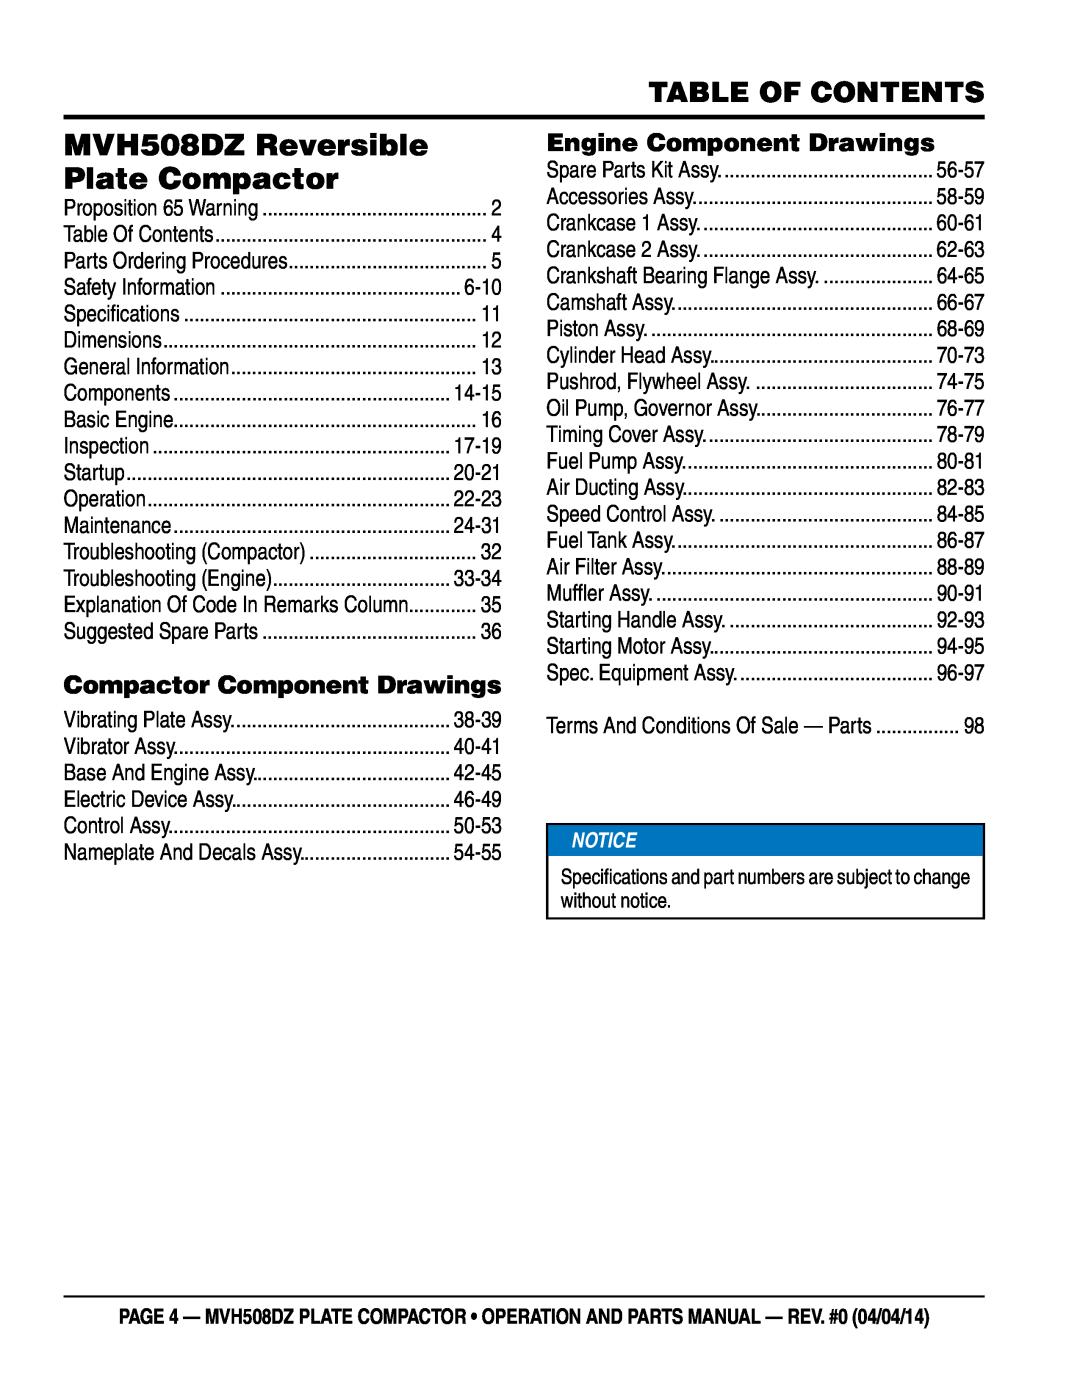 Multiquip HATZ1D81S-325 Table Of Contents, Compactor Component Drawings, Engine Component Drawings, MVH508DZ Reversible 